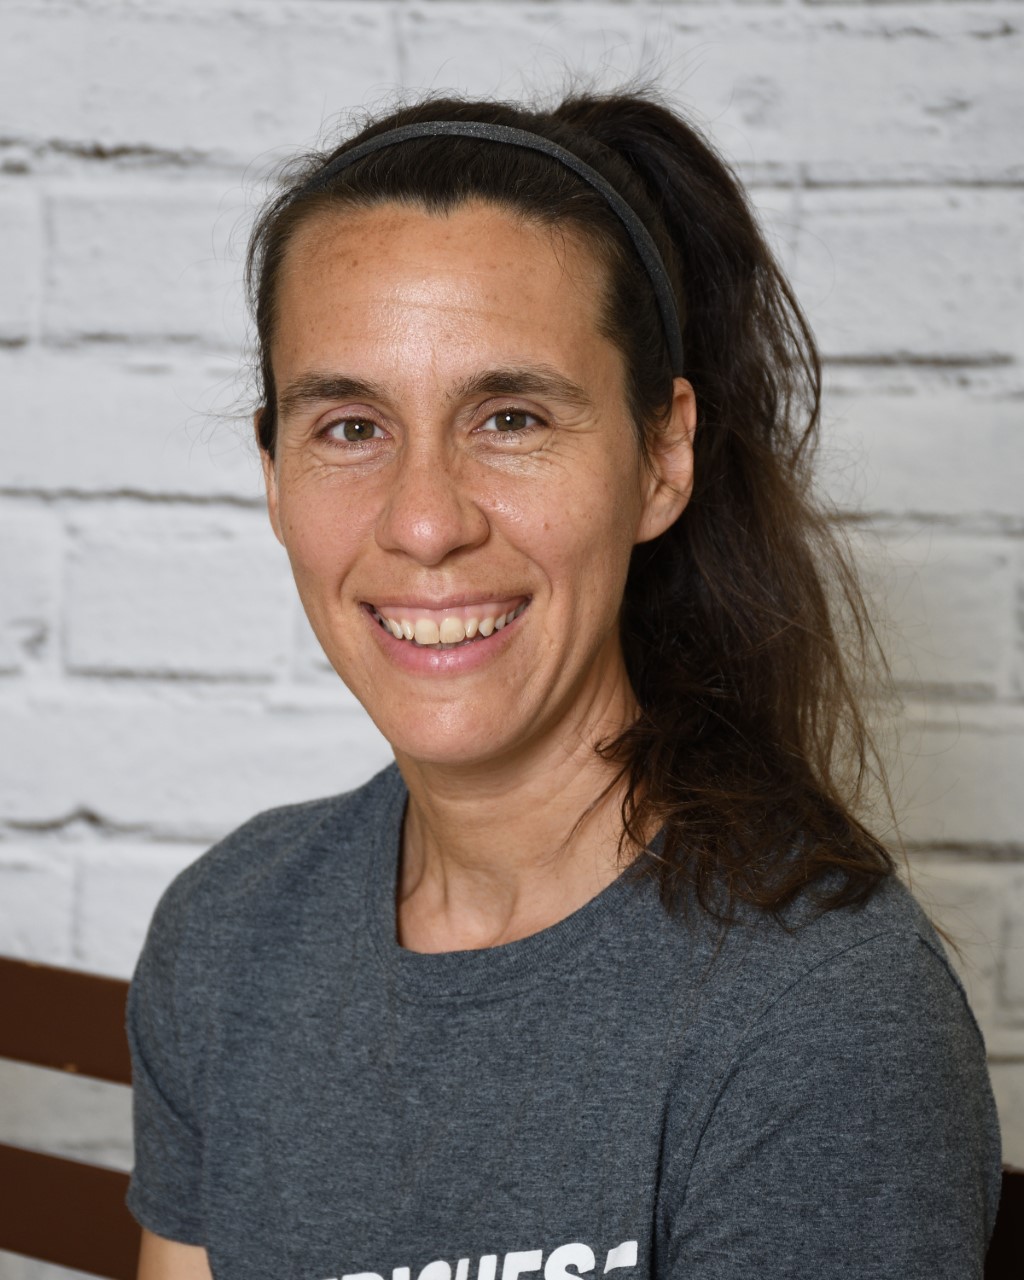 White woman wearing a grey t-shirt smiling. She has dark brown hair in a ponytail. 